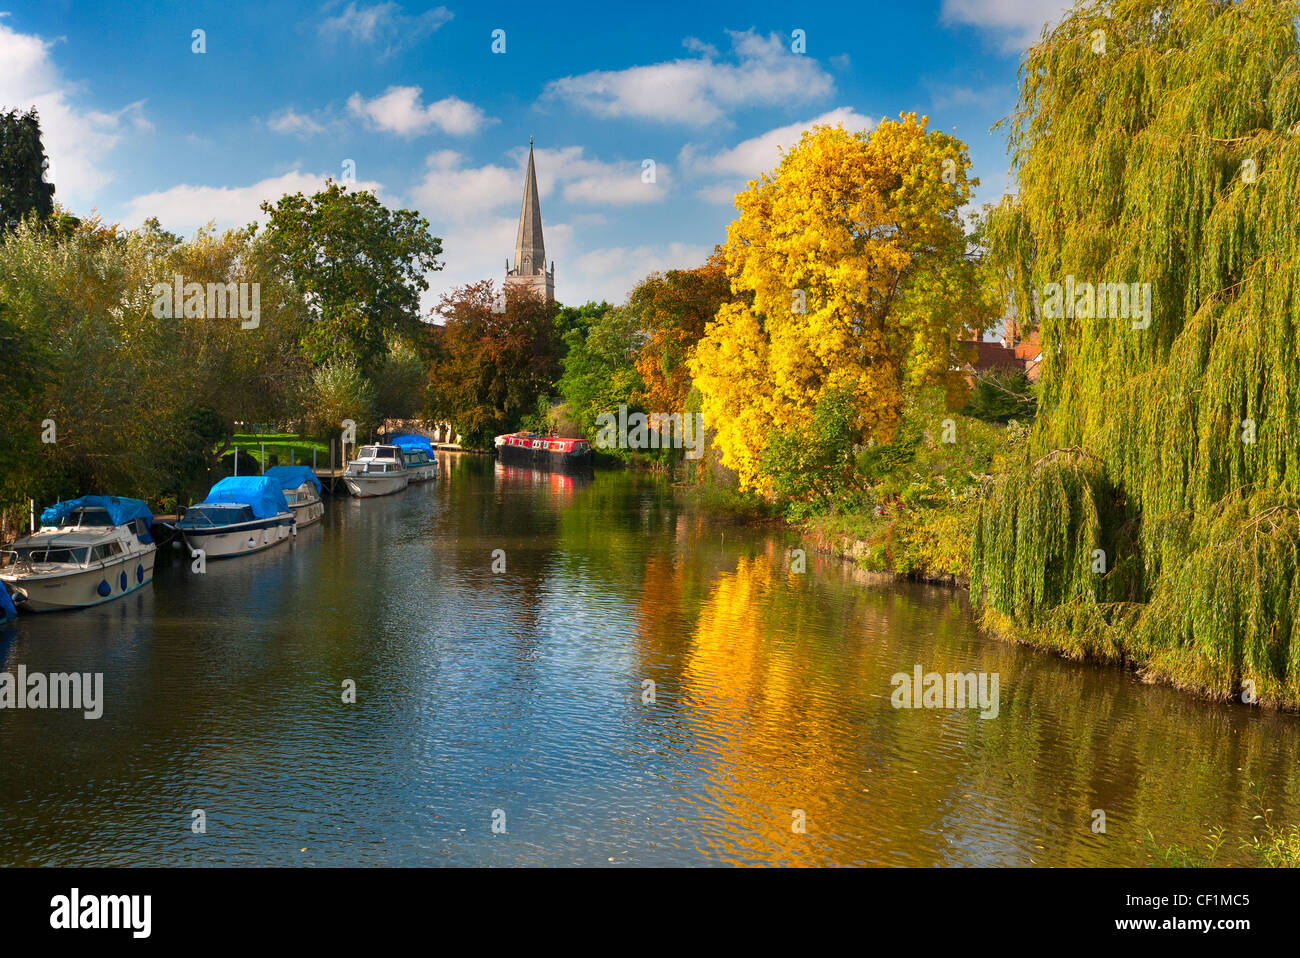 Autumnal colour on display along the River Thames at Abingdon 2. Stock Photo